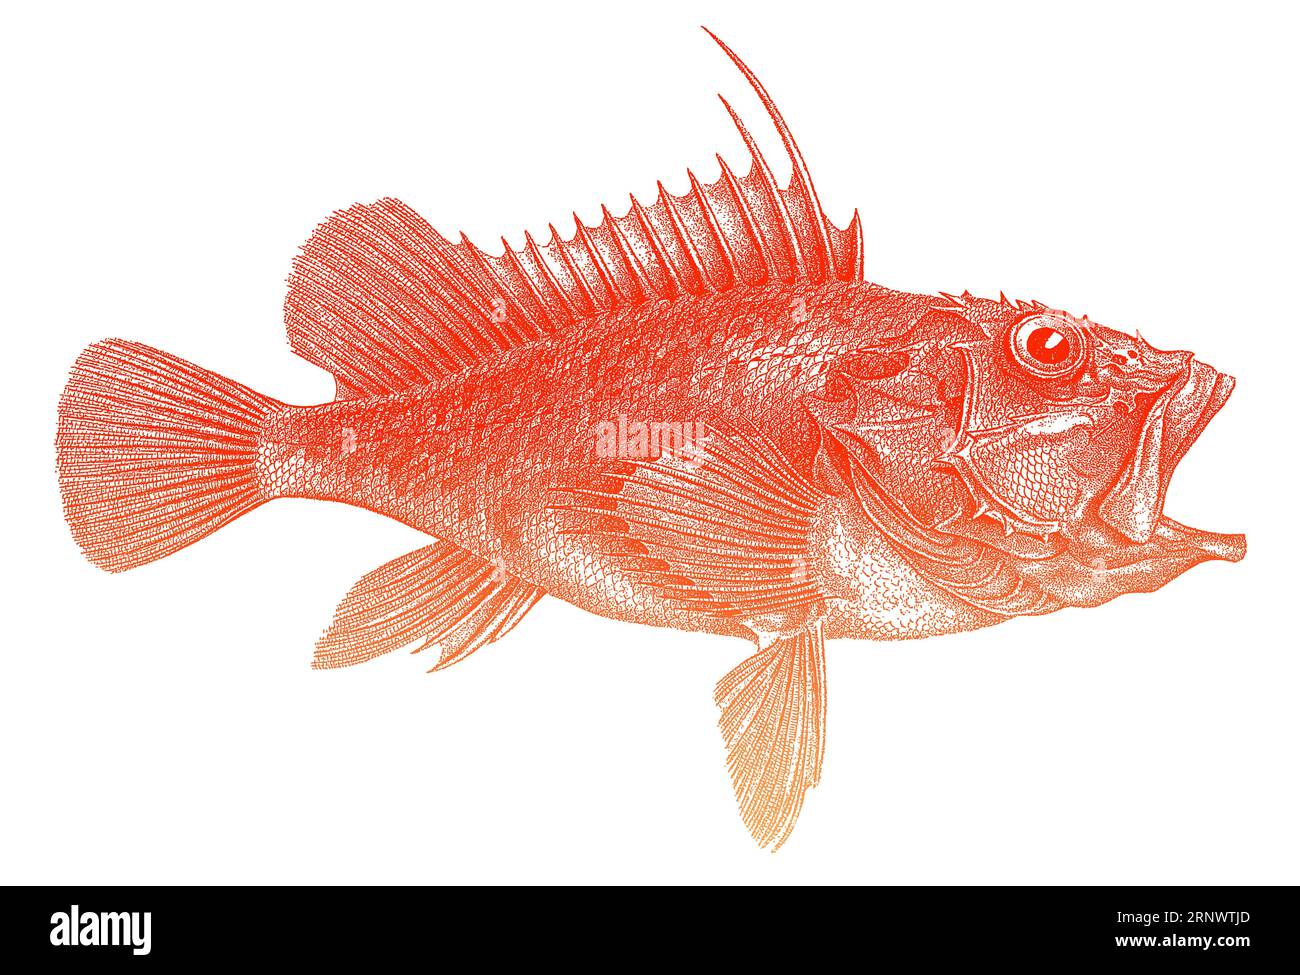 Offshore rockfish pontinus kuhlii in side view, marine fish from Eastern Atlantic Stock Vector